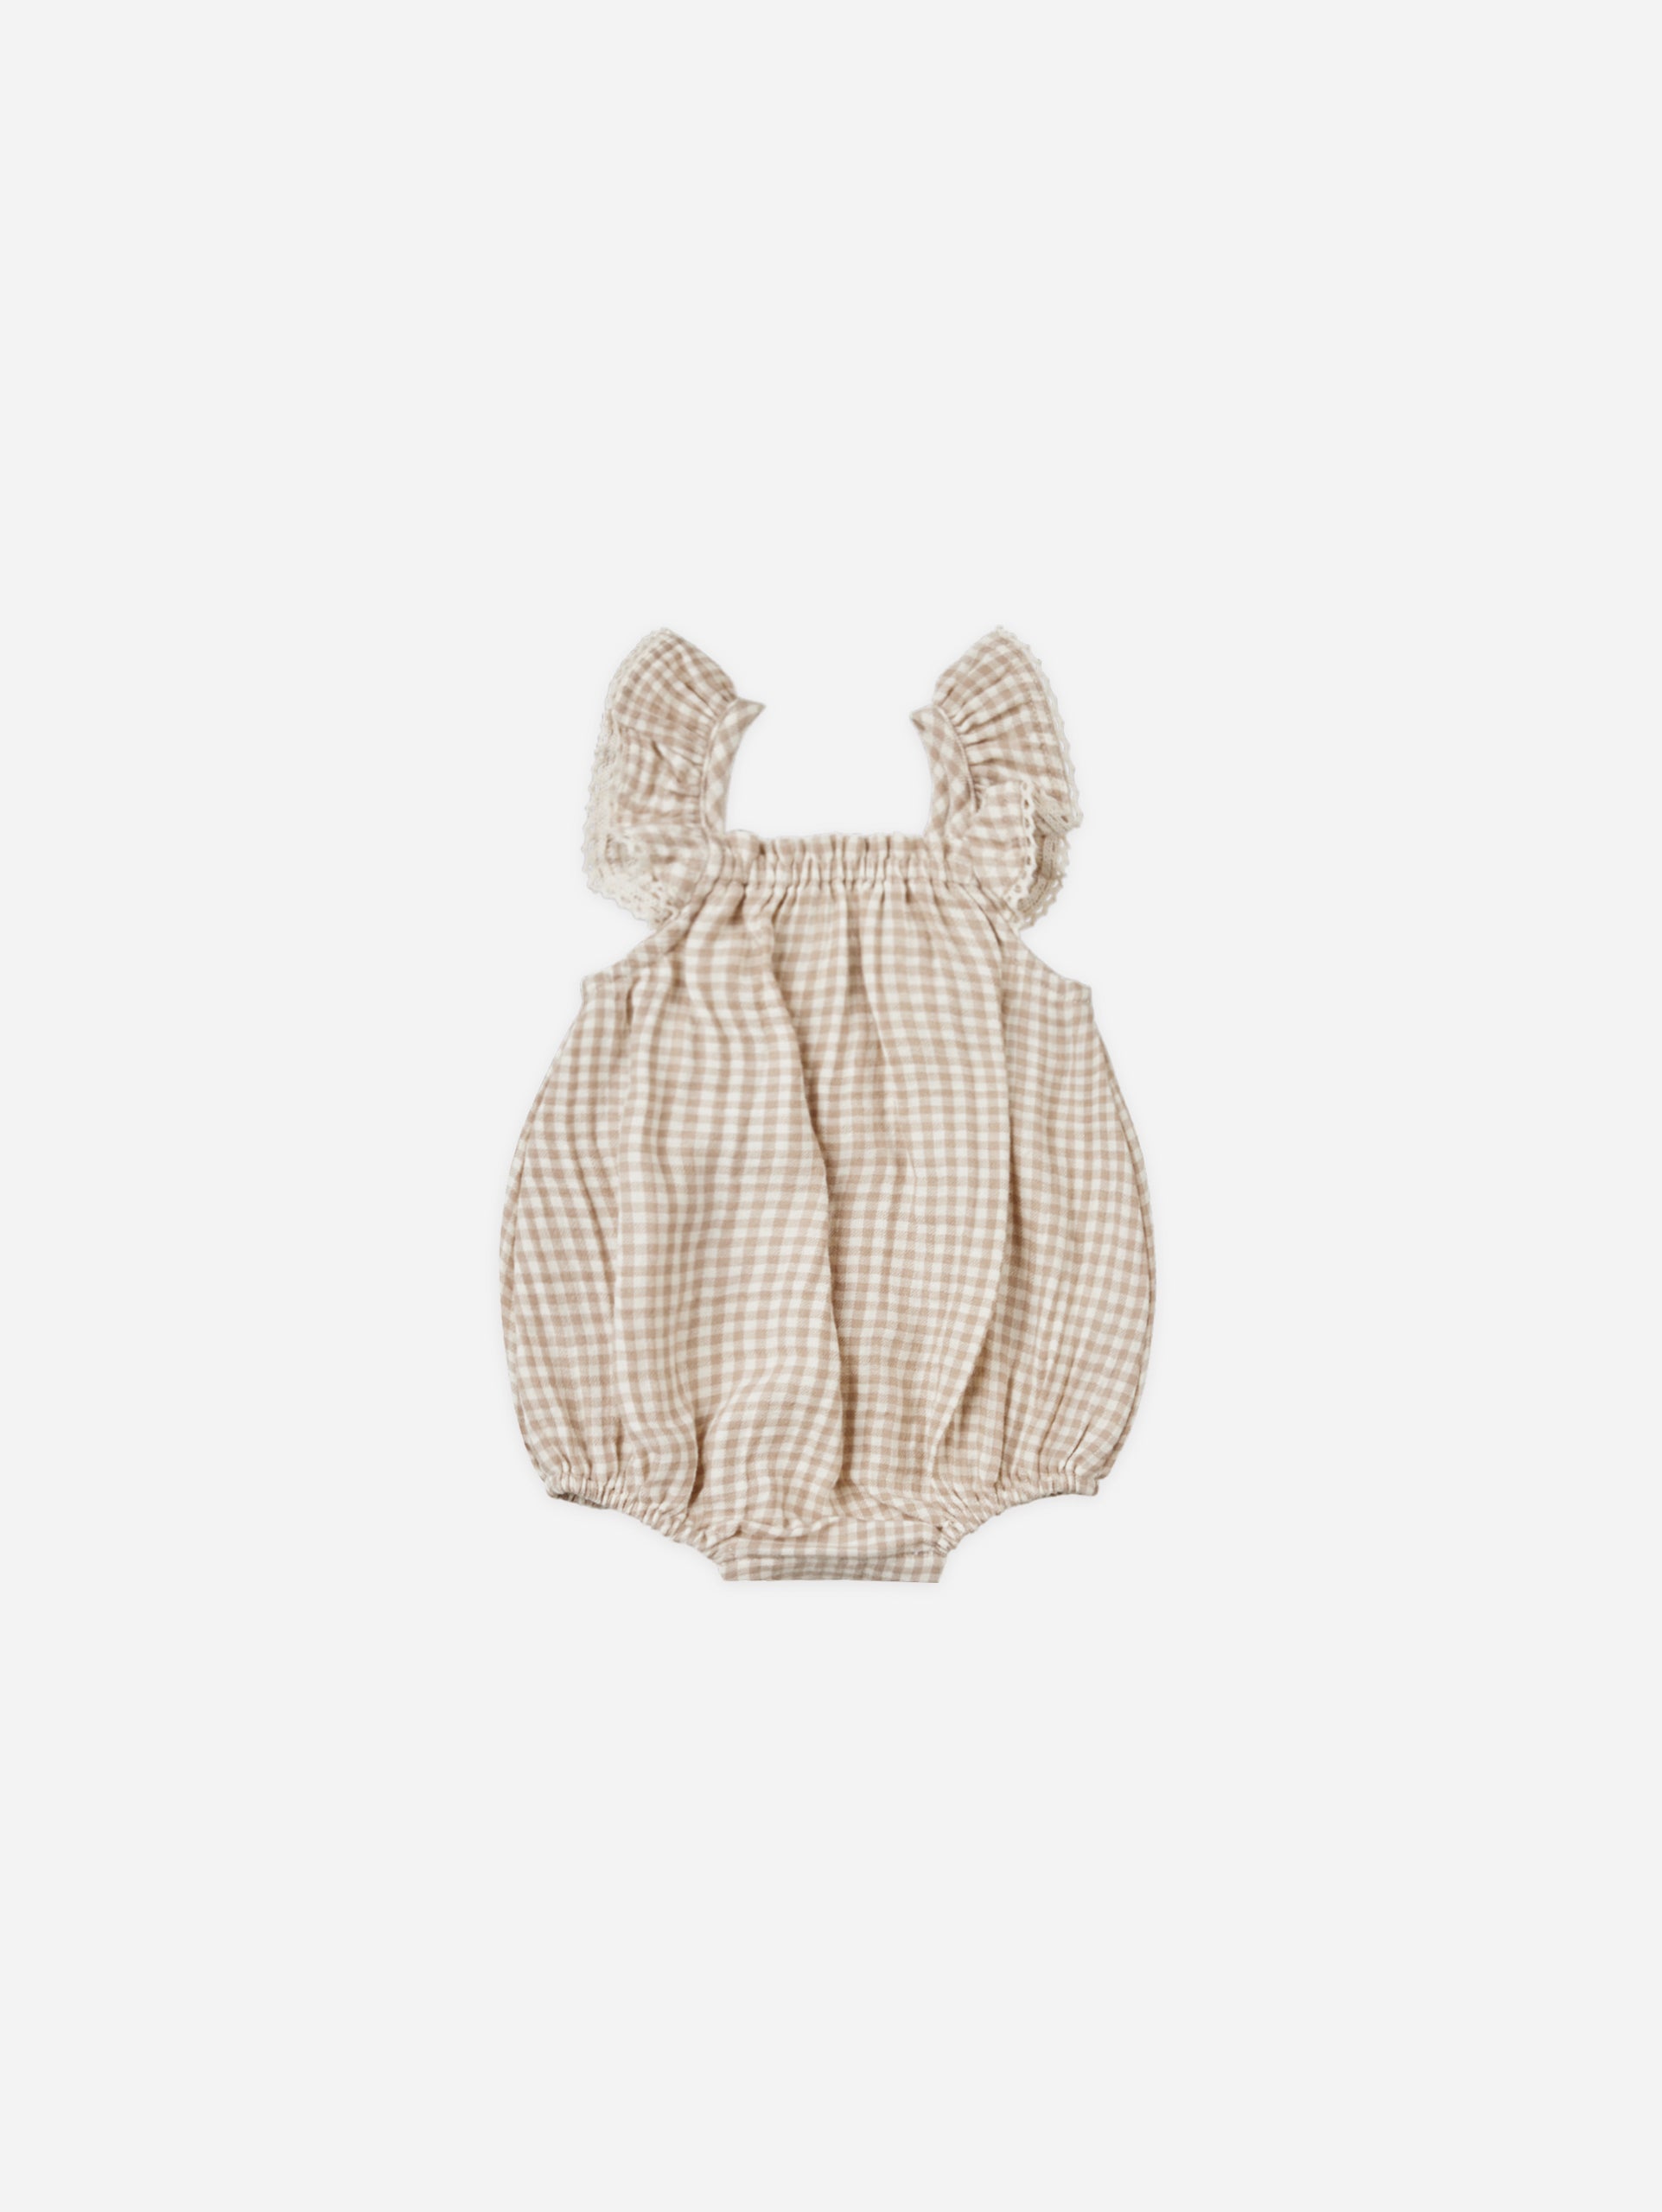 Bonnie Romper || Oat Gingham - Rylee + Cru | Kids Clothes | Trendy Baby Clothes | Modern Infant Outfits |